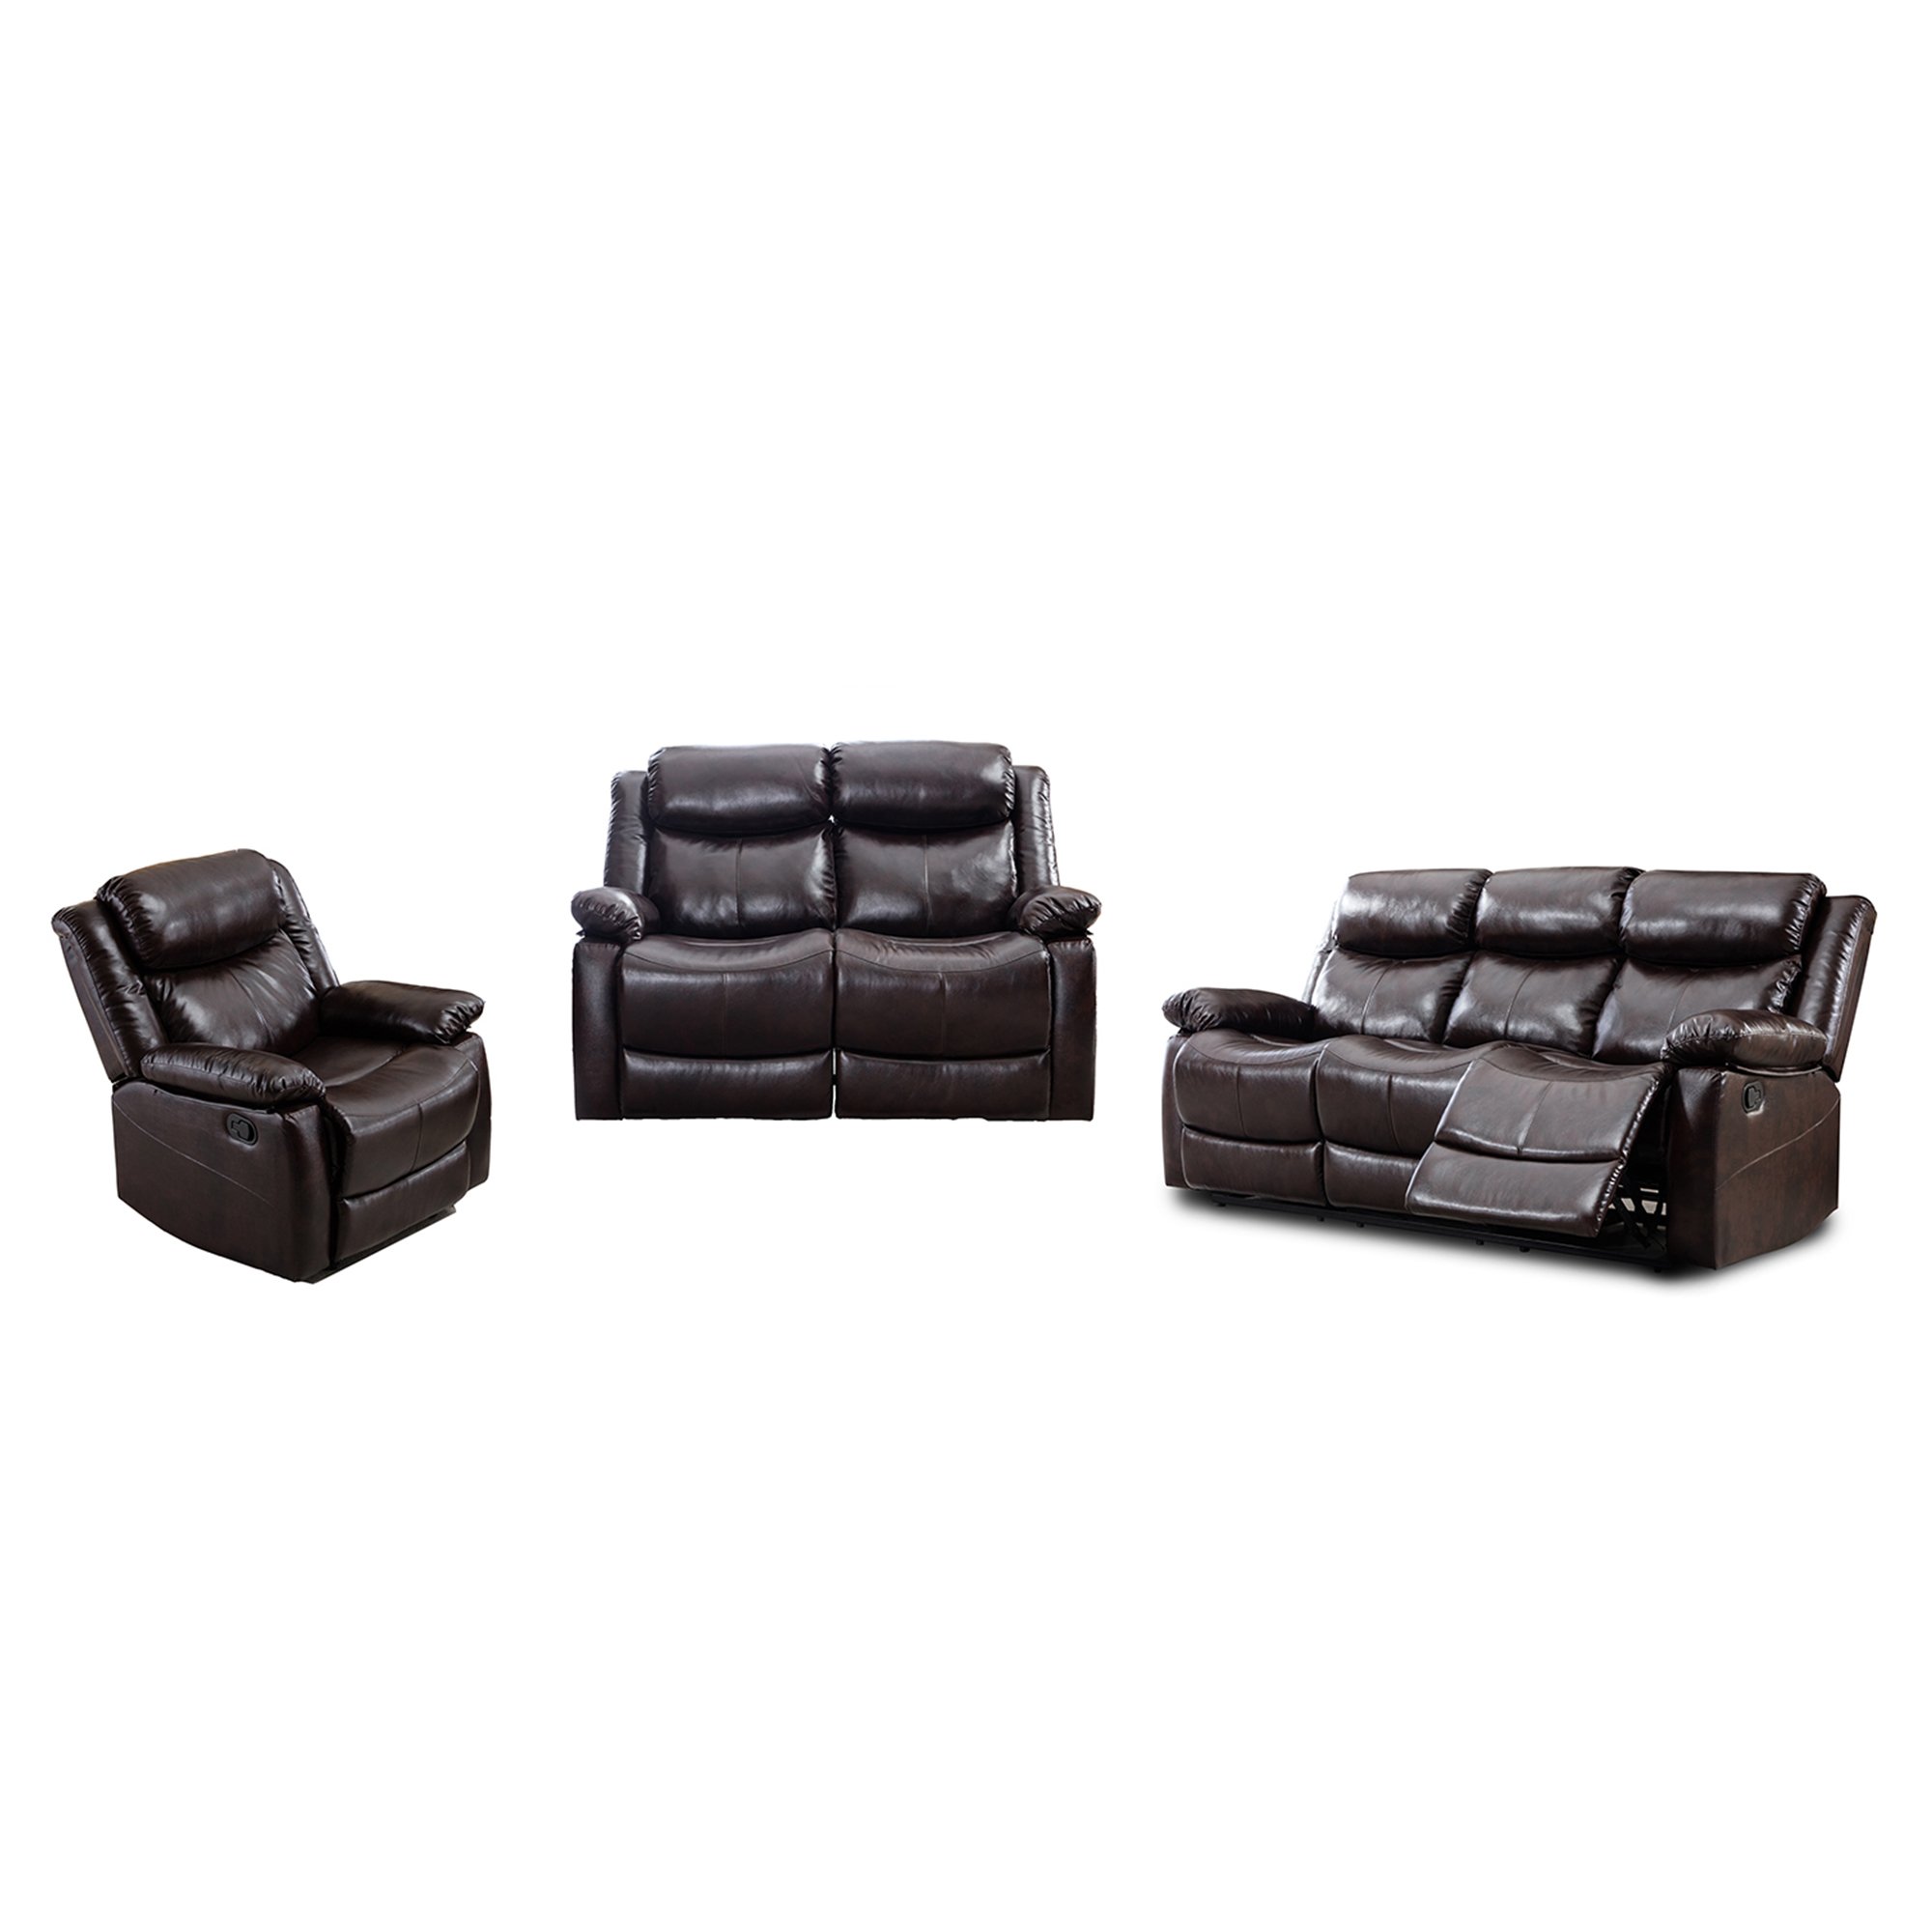 PU Leather Reclining Sofa Set- Classic Sectional Couch Furniture Lounge Chair, Loveseat and Three Seat-CASAINC